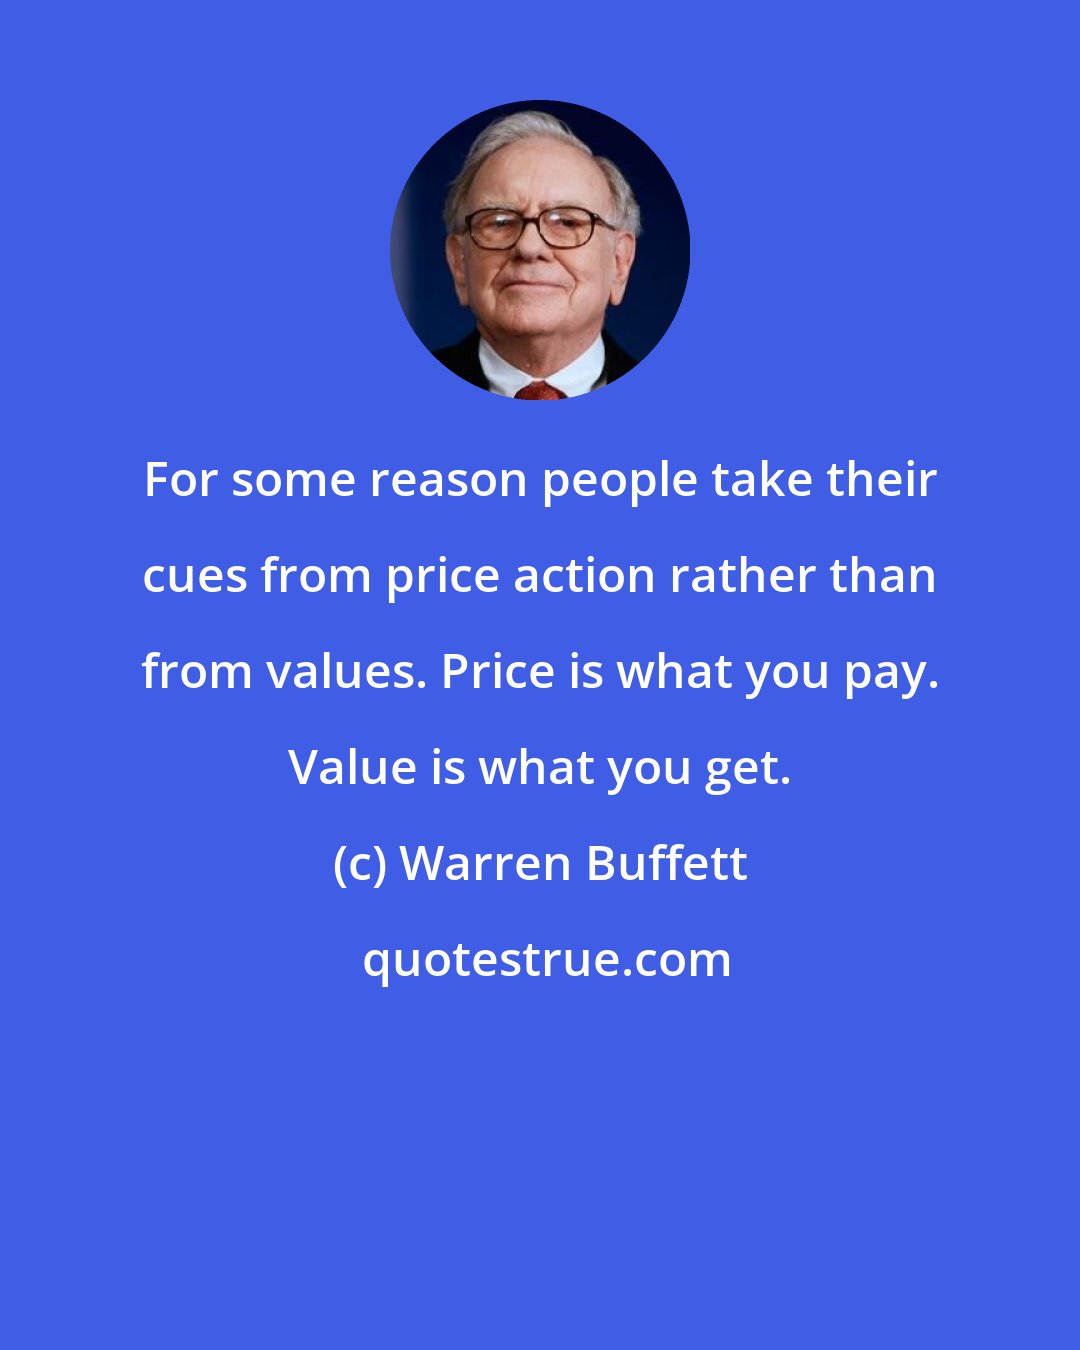 Warren Buffett: For some reason people take their cues from price action rather than from values. Price is what you pay. Value is what you get.